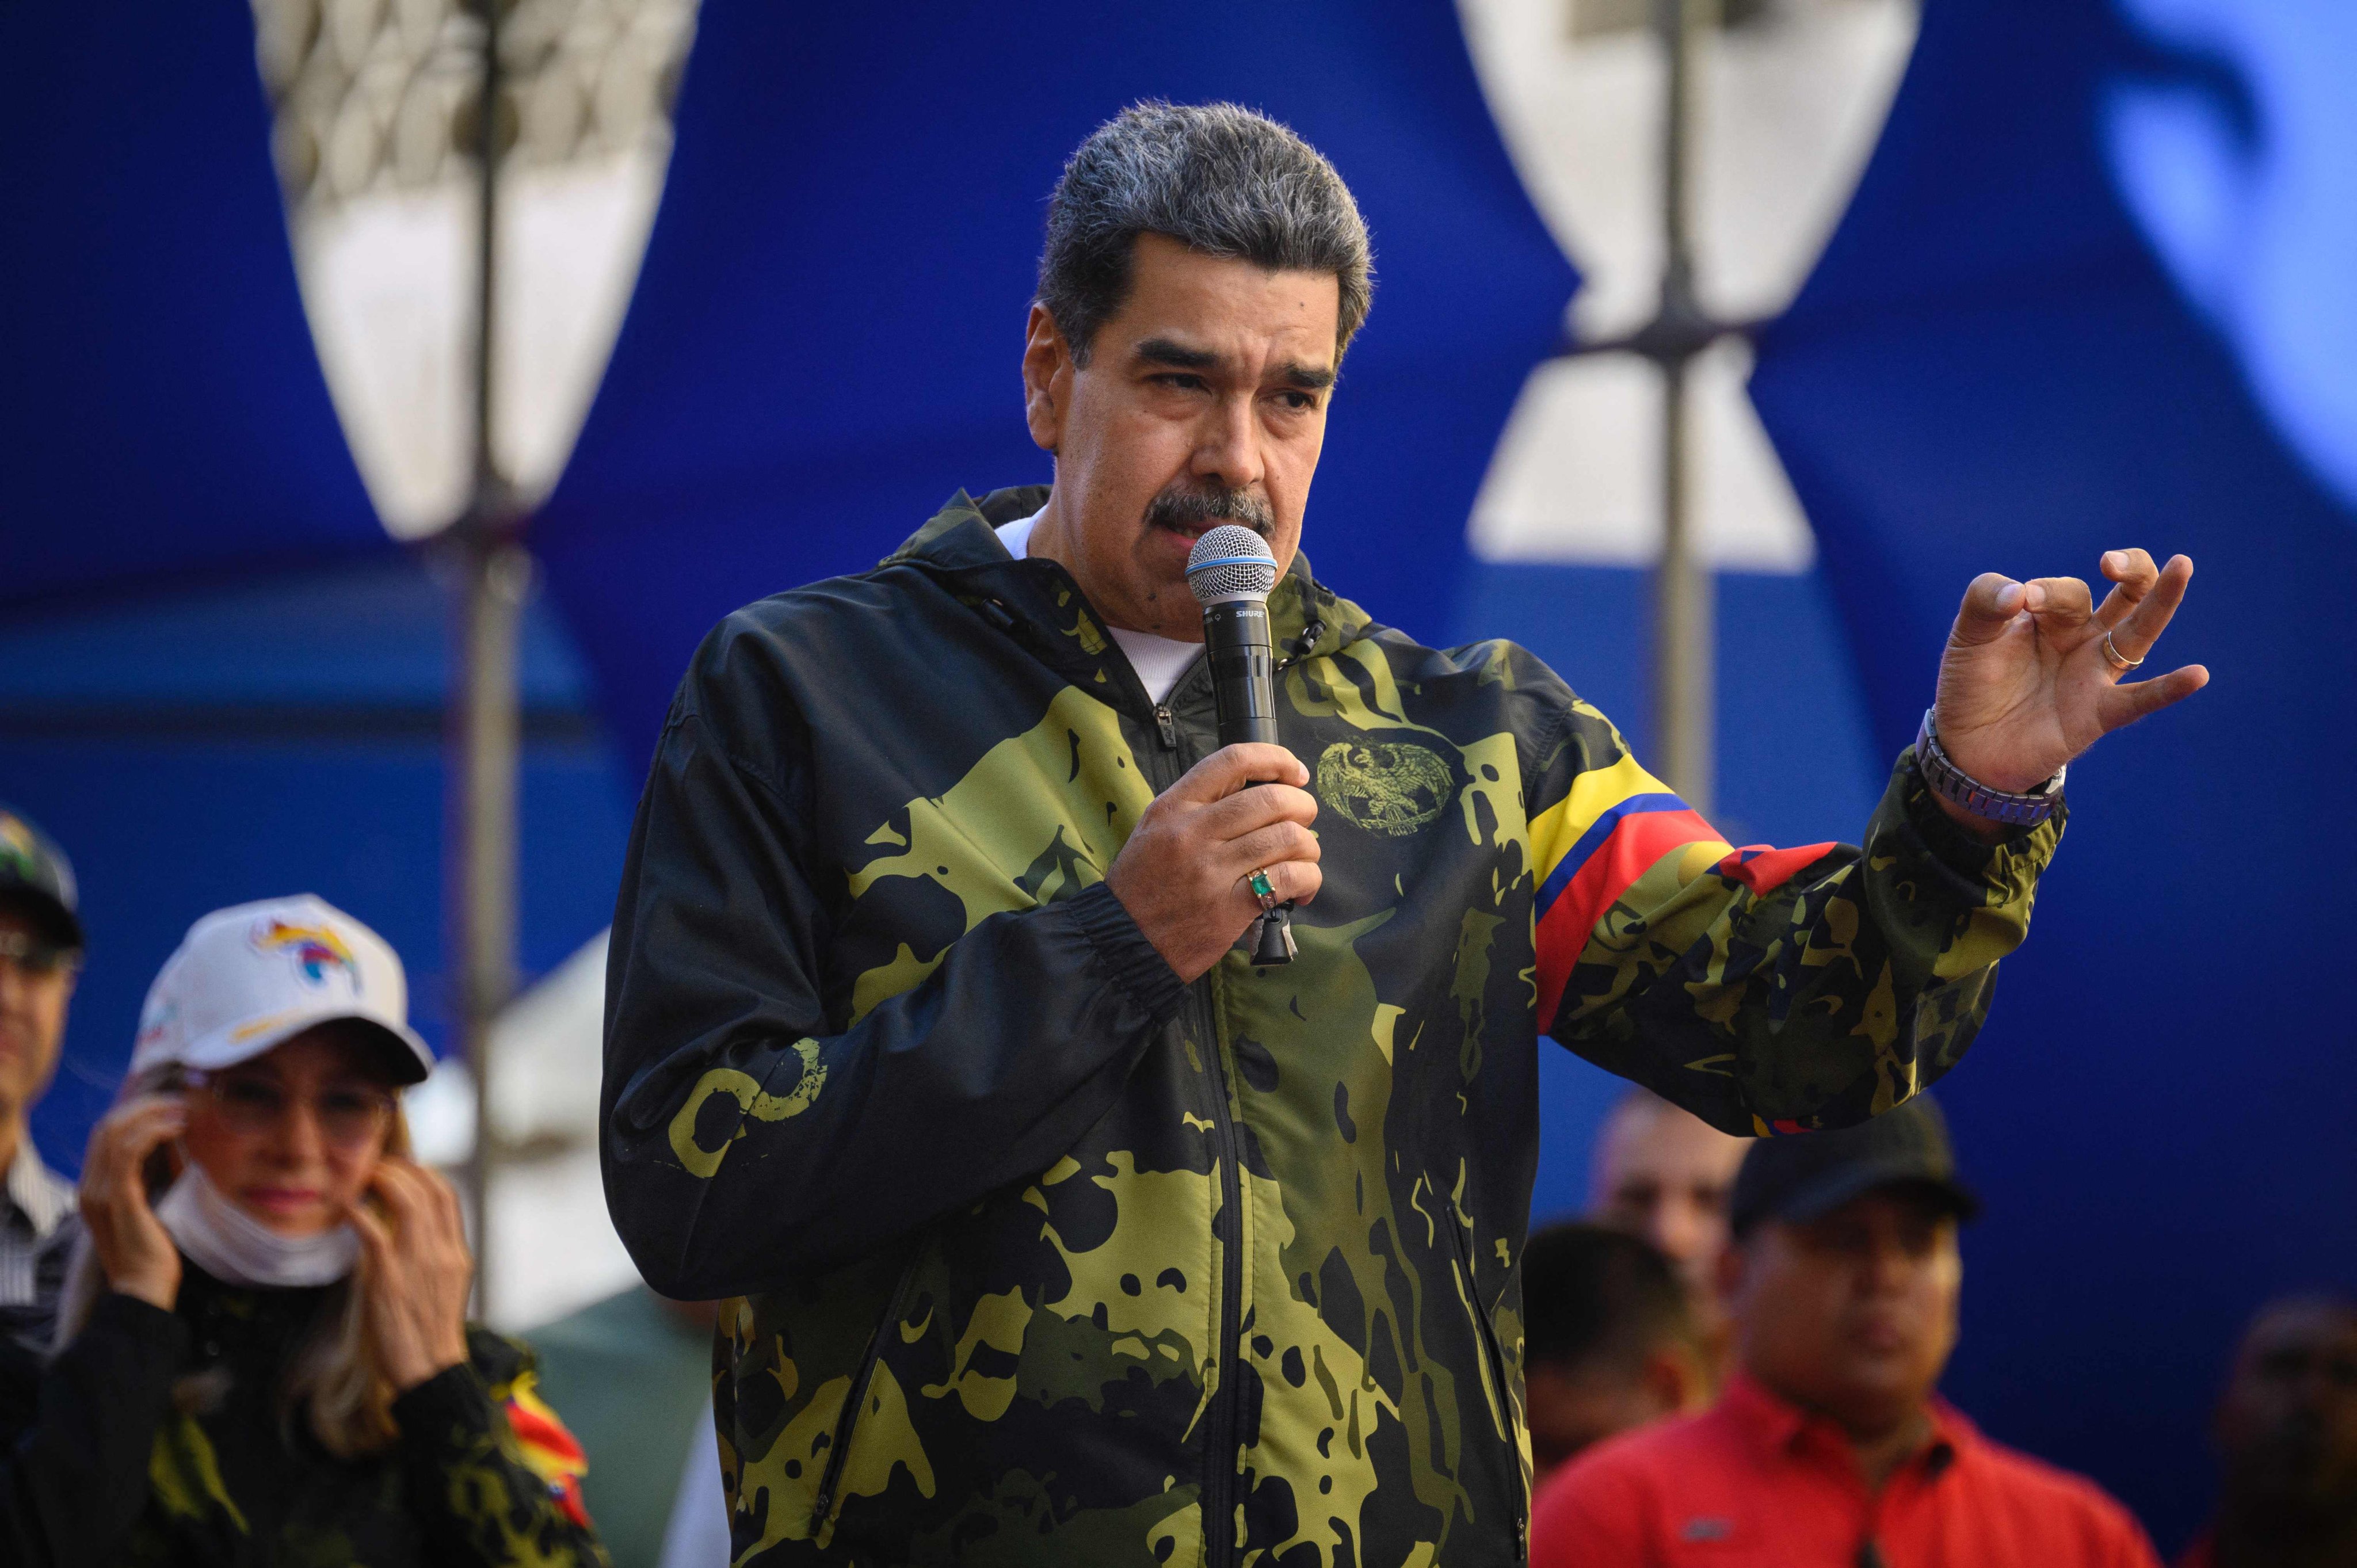 Venezuelan President Nicolas Maduro speaks to supporters during a rally in Caracas in January. Photo: AFP